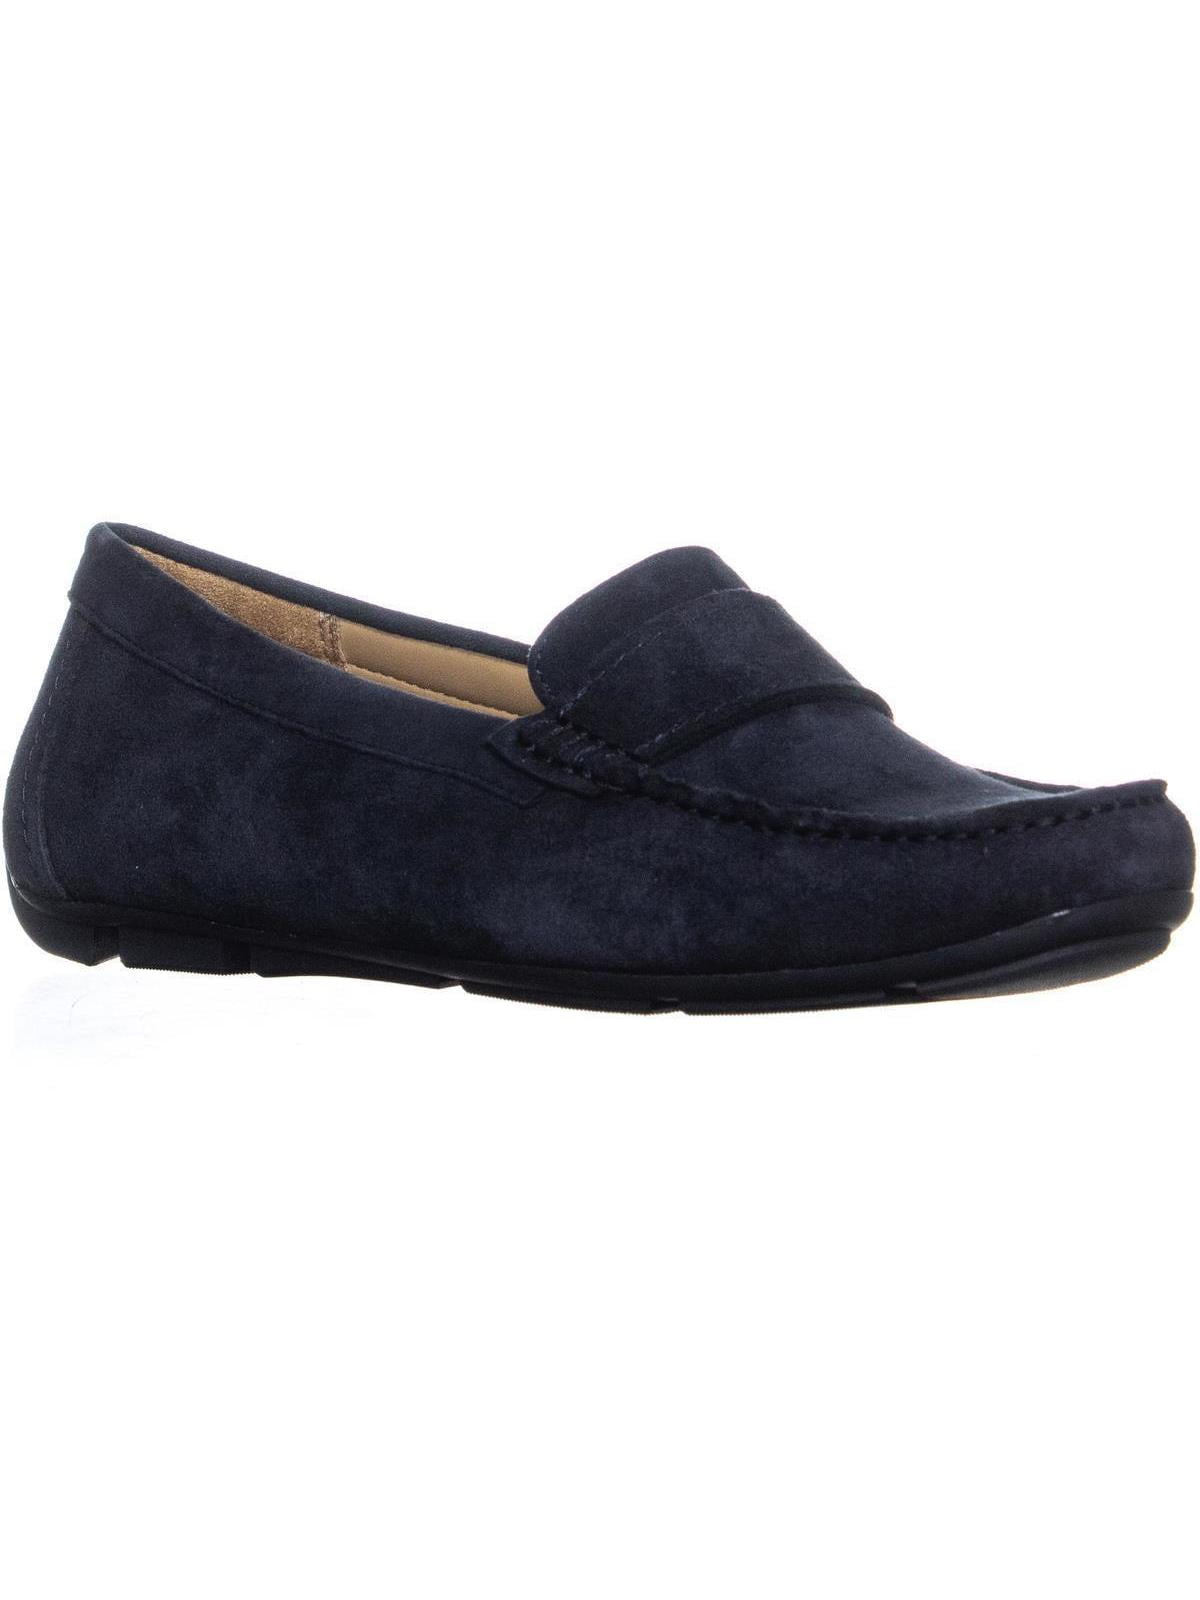 Naturalizer - Womens naturalizer Brynn Slip On Loafers, Navy Suede, 8.5 ...